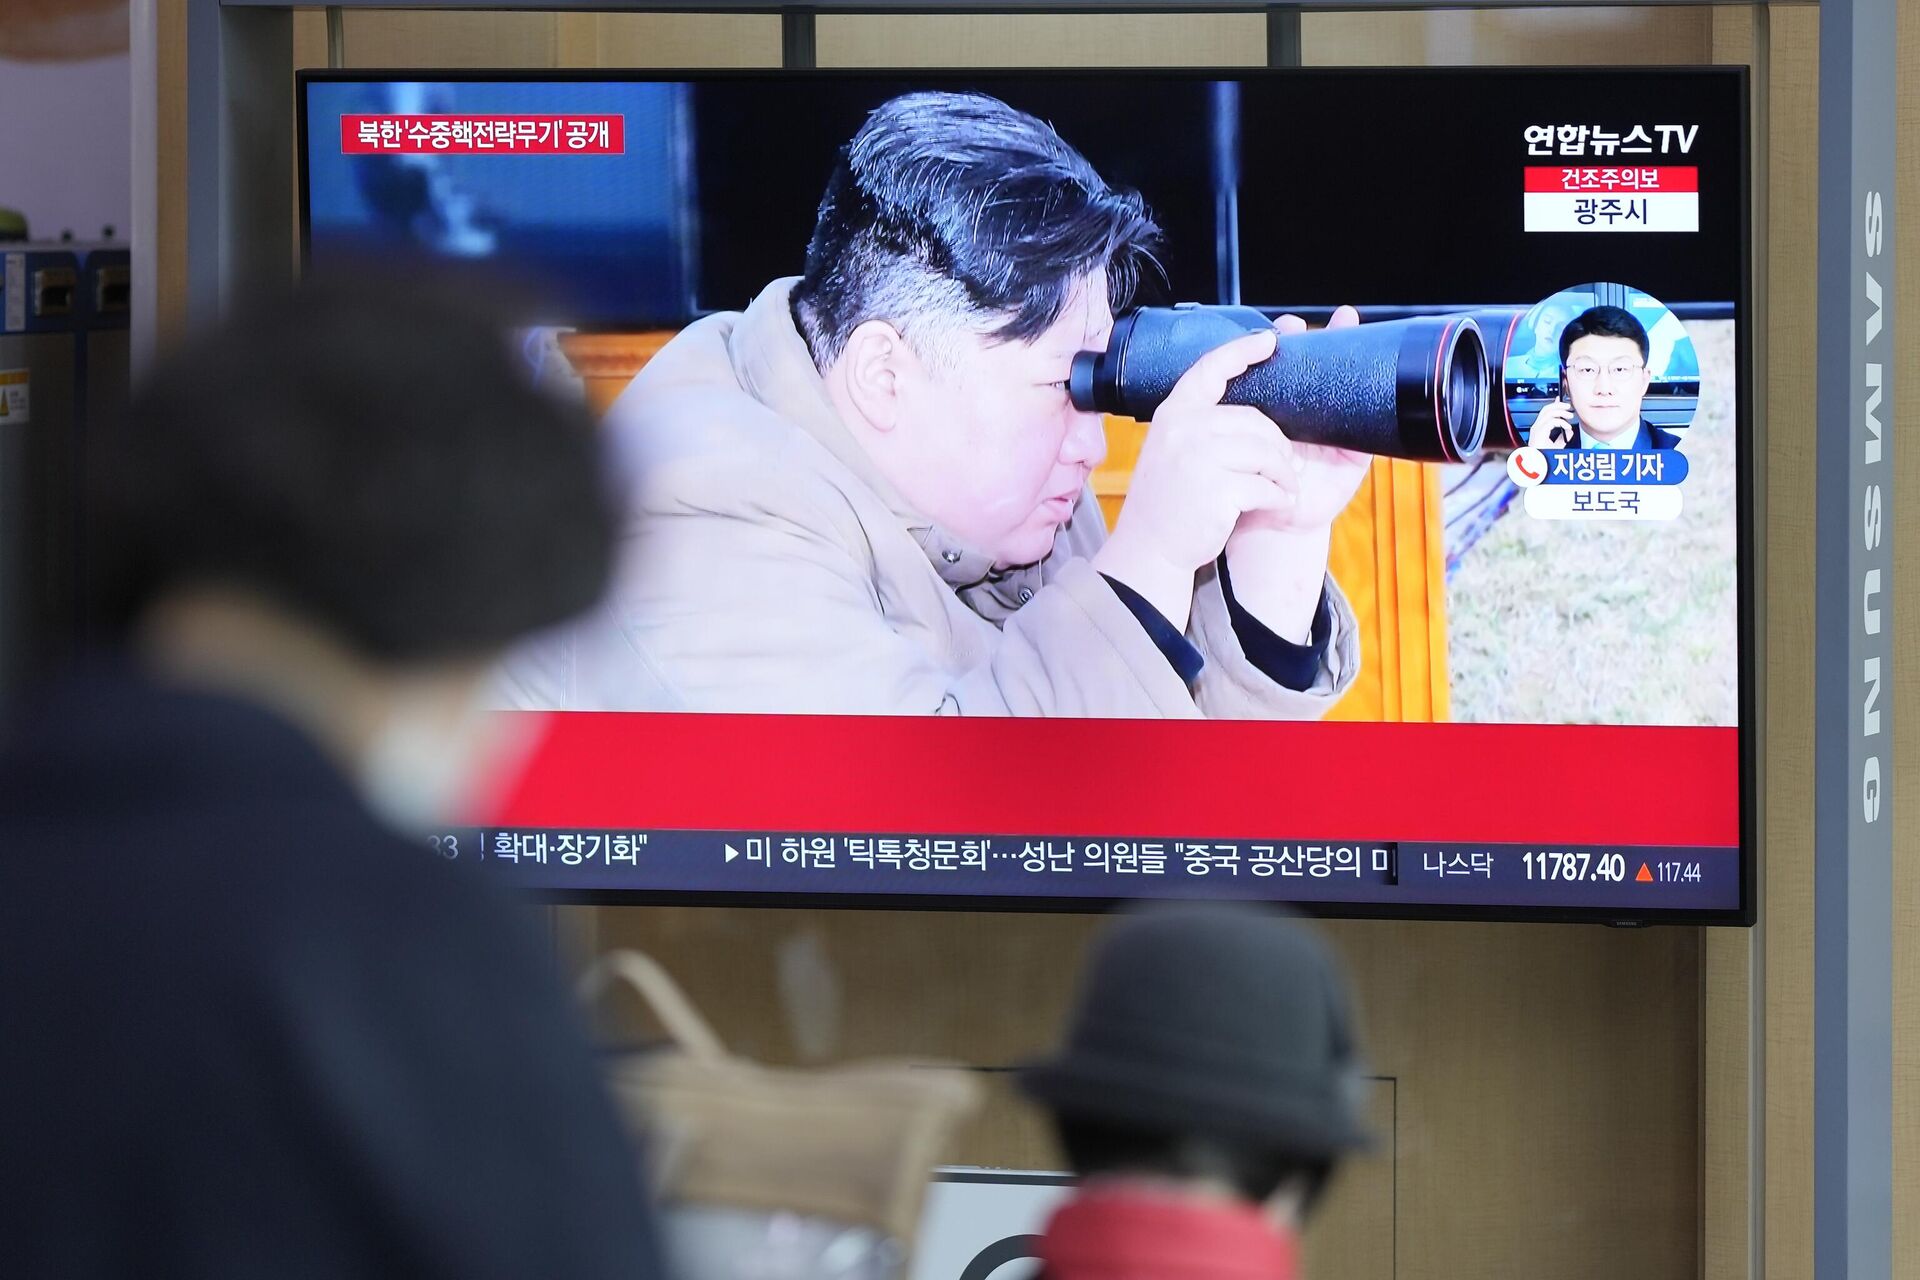 A TV screen shows an image of North Korean leader Kim Jong Un during a news program at the Seoul Railway Station in Seoul, South Korea, Friday, March 24, 2023. North Korea said Friday its latest cruise missile launches this week were part of nuclear attack simulations that also involved a test of a purported underwater attack drone as leader Kim Jong Un vowed to make his rivals plunge into despair. - Sputnik International, 1920, 24.03.2023